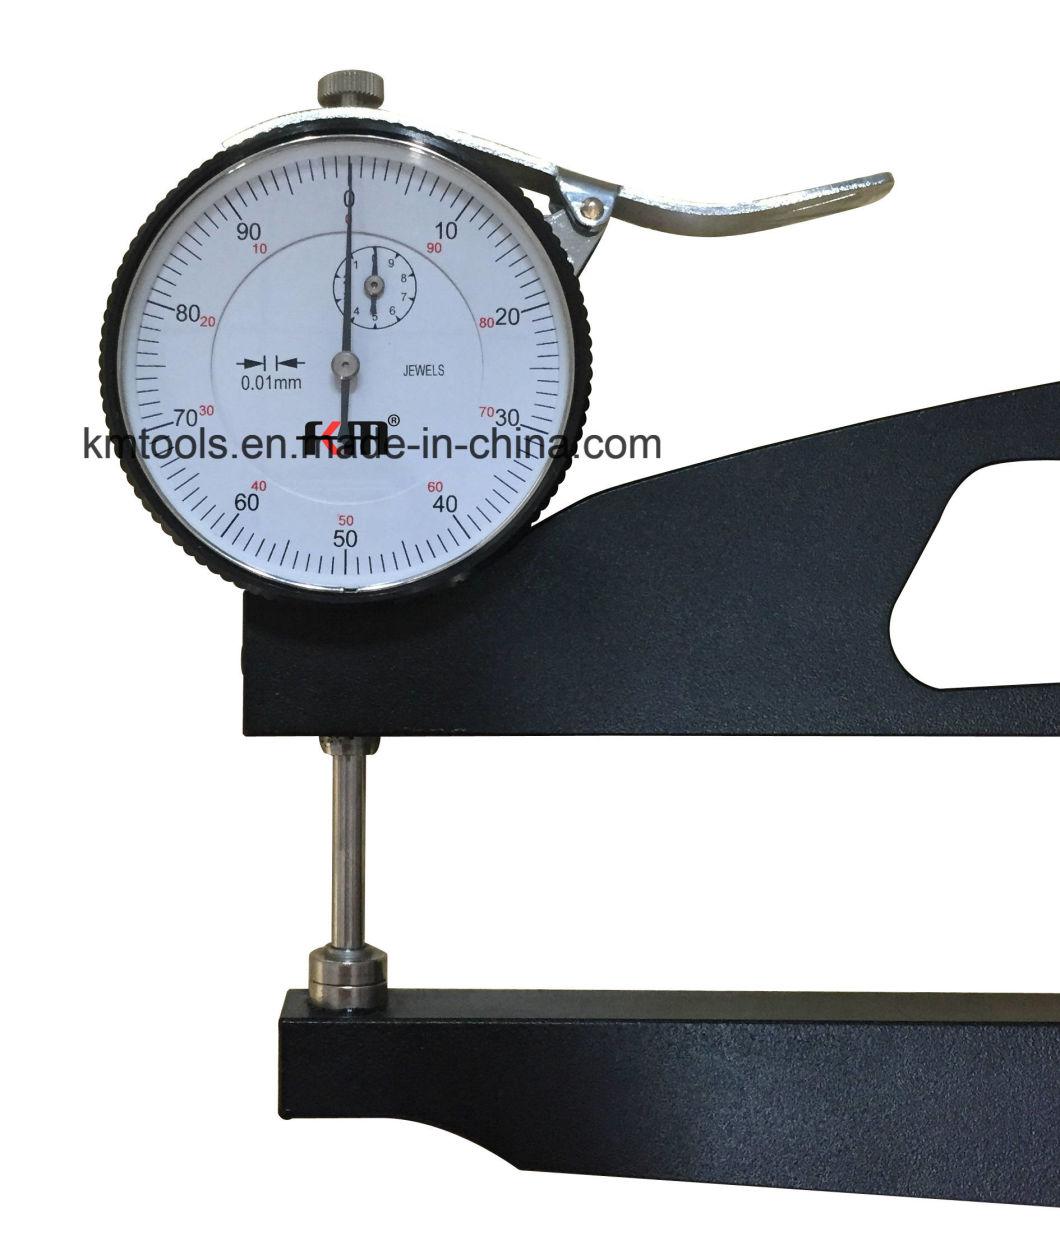 0-10mm Deep Throat Thickness Gauge with 300mm Measuring Depth